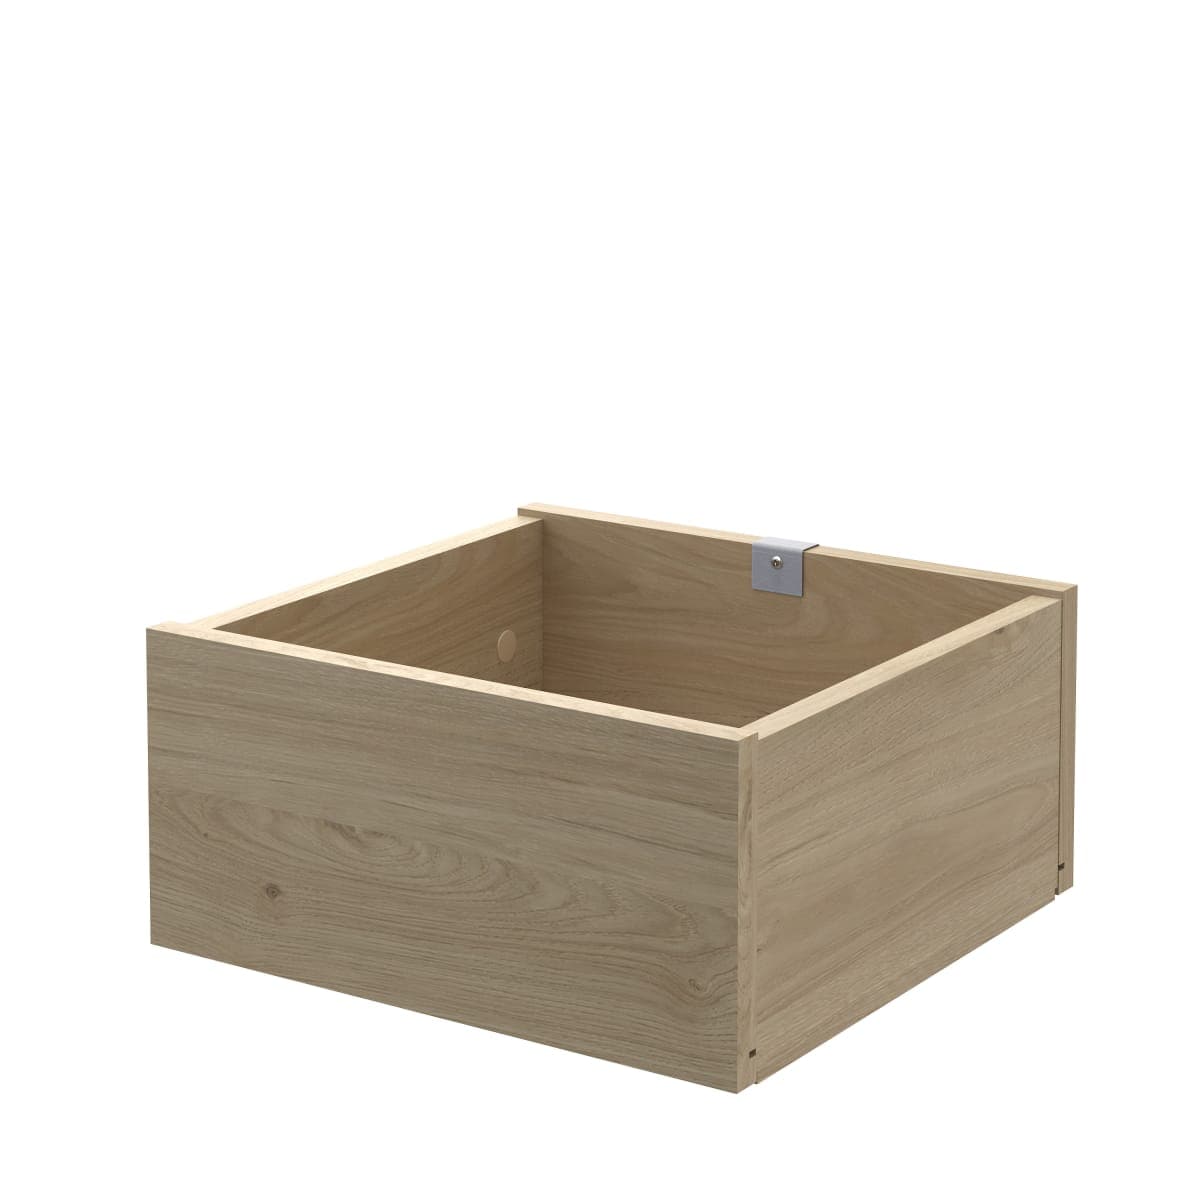 KUB SPACEO DRAWER L32.4xP31.6xH15CM IN WOOD IN OAK COLOUR